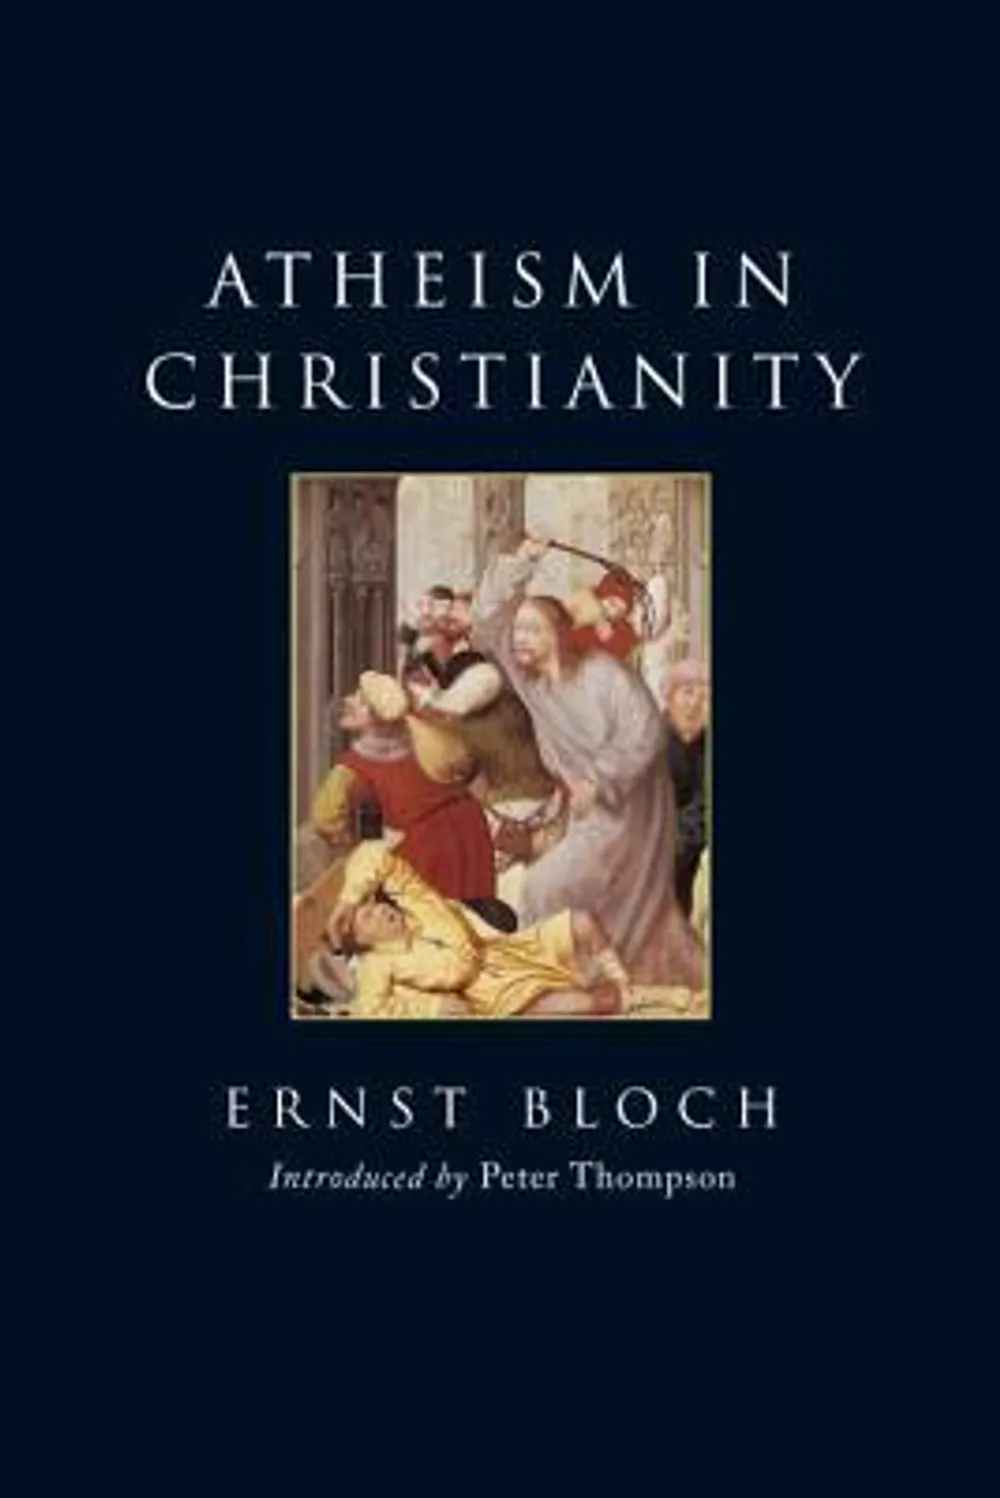 Atheism in Christianity, by Ernst Bloch